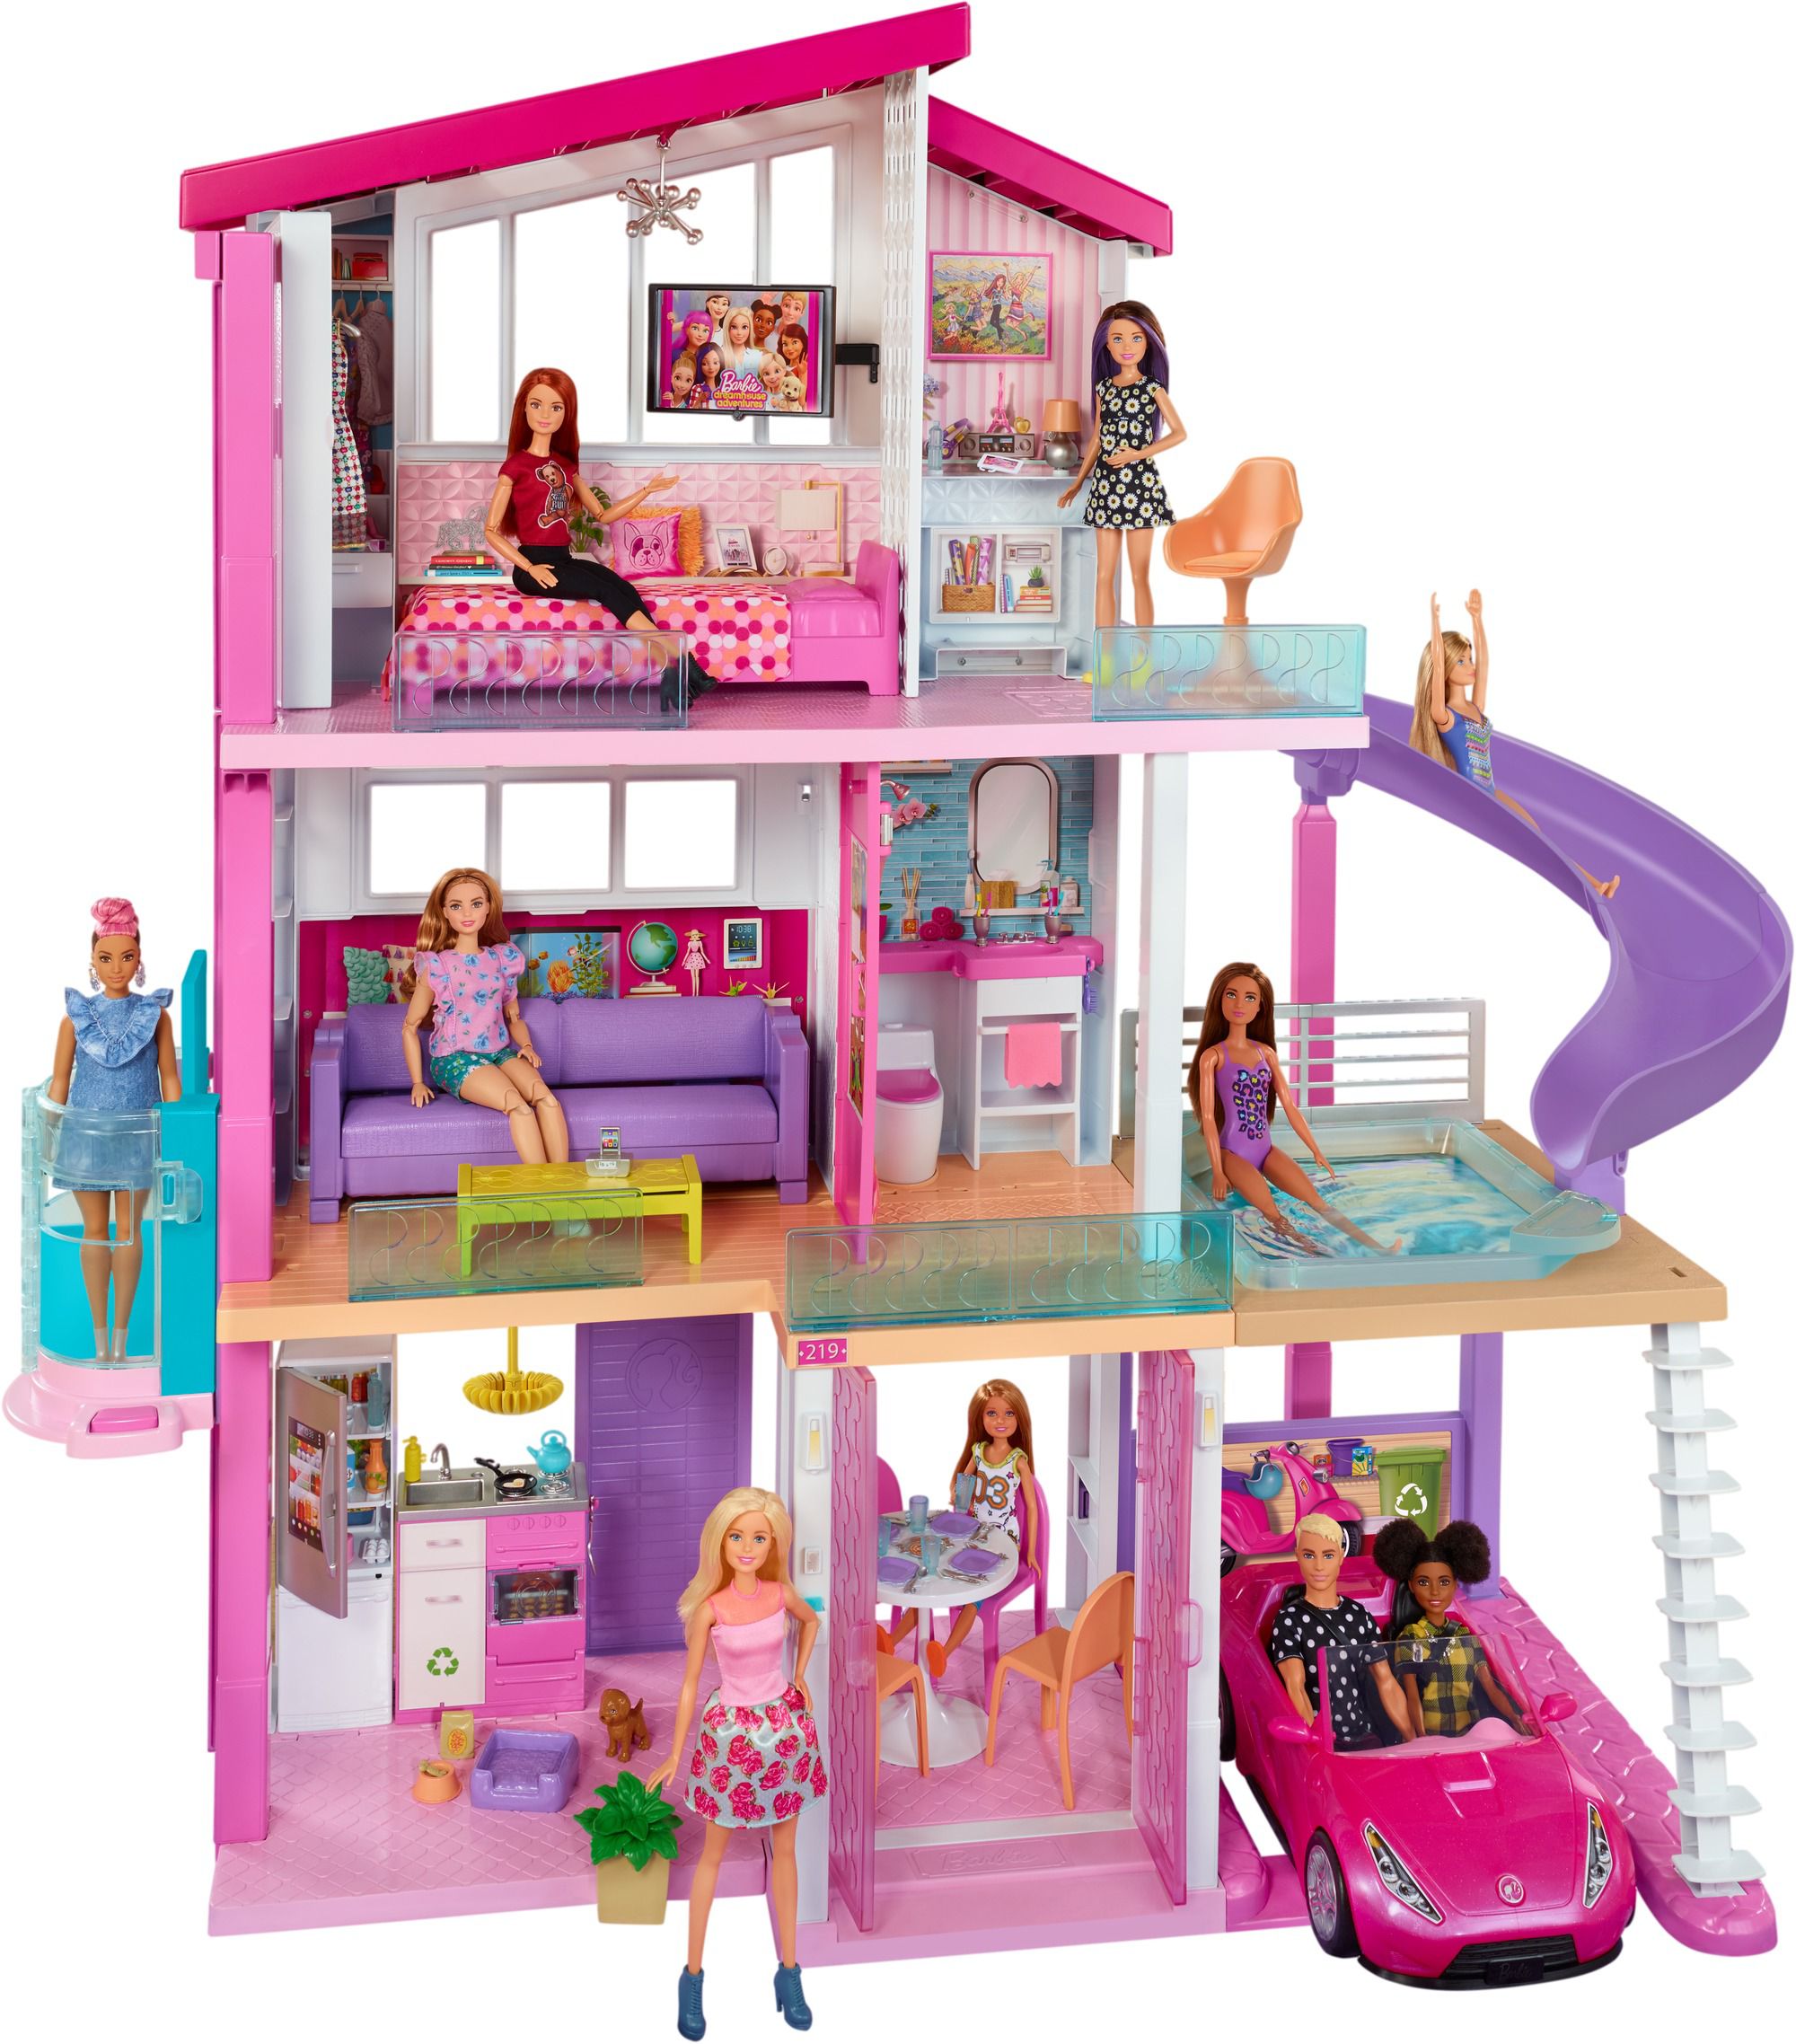 Four Barbie Dolls Morning Bedroom Bunkbed Routine. Life in a Dreamhouse DIY  Mini Doll House. 